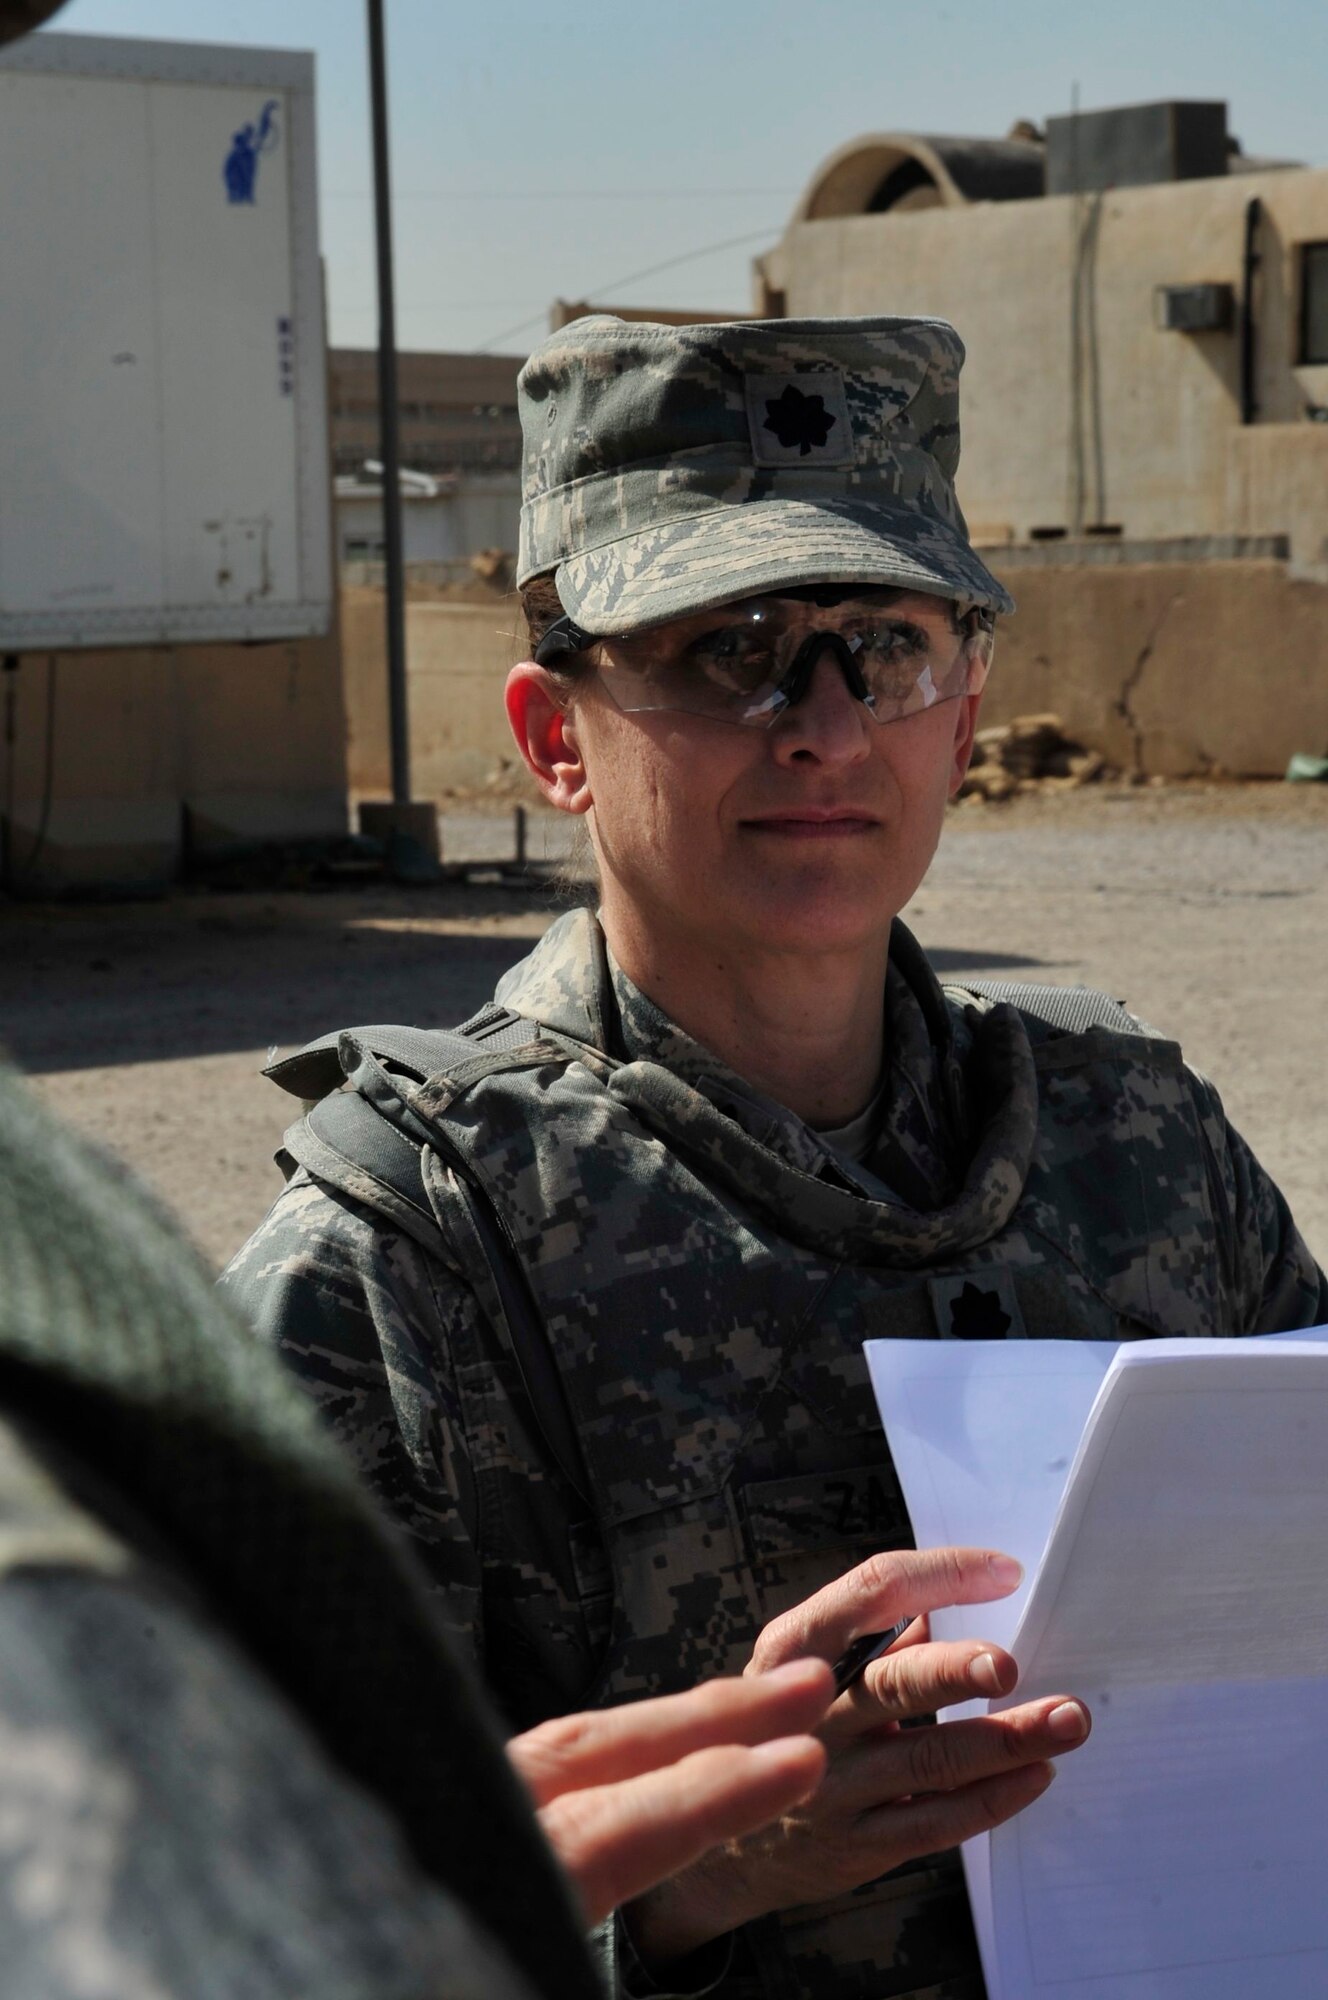 U.S. Air Force Lt. Col. Kaylin Haywood Zapata, Edmond, Okla., native and an Iraq Training and Advisory Mission – Police oil and electric police advisor, reviews a checklist before she joins the corrections assistance transition team for a mission leaving Joint Security Station Shield, Iraq, April 6, 2011. She is helping assess the conditions at a women’s prison in Baghdad’s Rusafa District. Colonel Haywood Zapata has a list of questions she will ask the warden at the facility. (U.S. Air Force photo by Senior Master Sgt. Larry A. Schneck/Released)